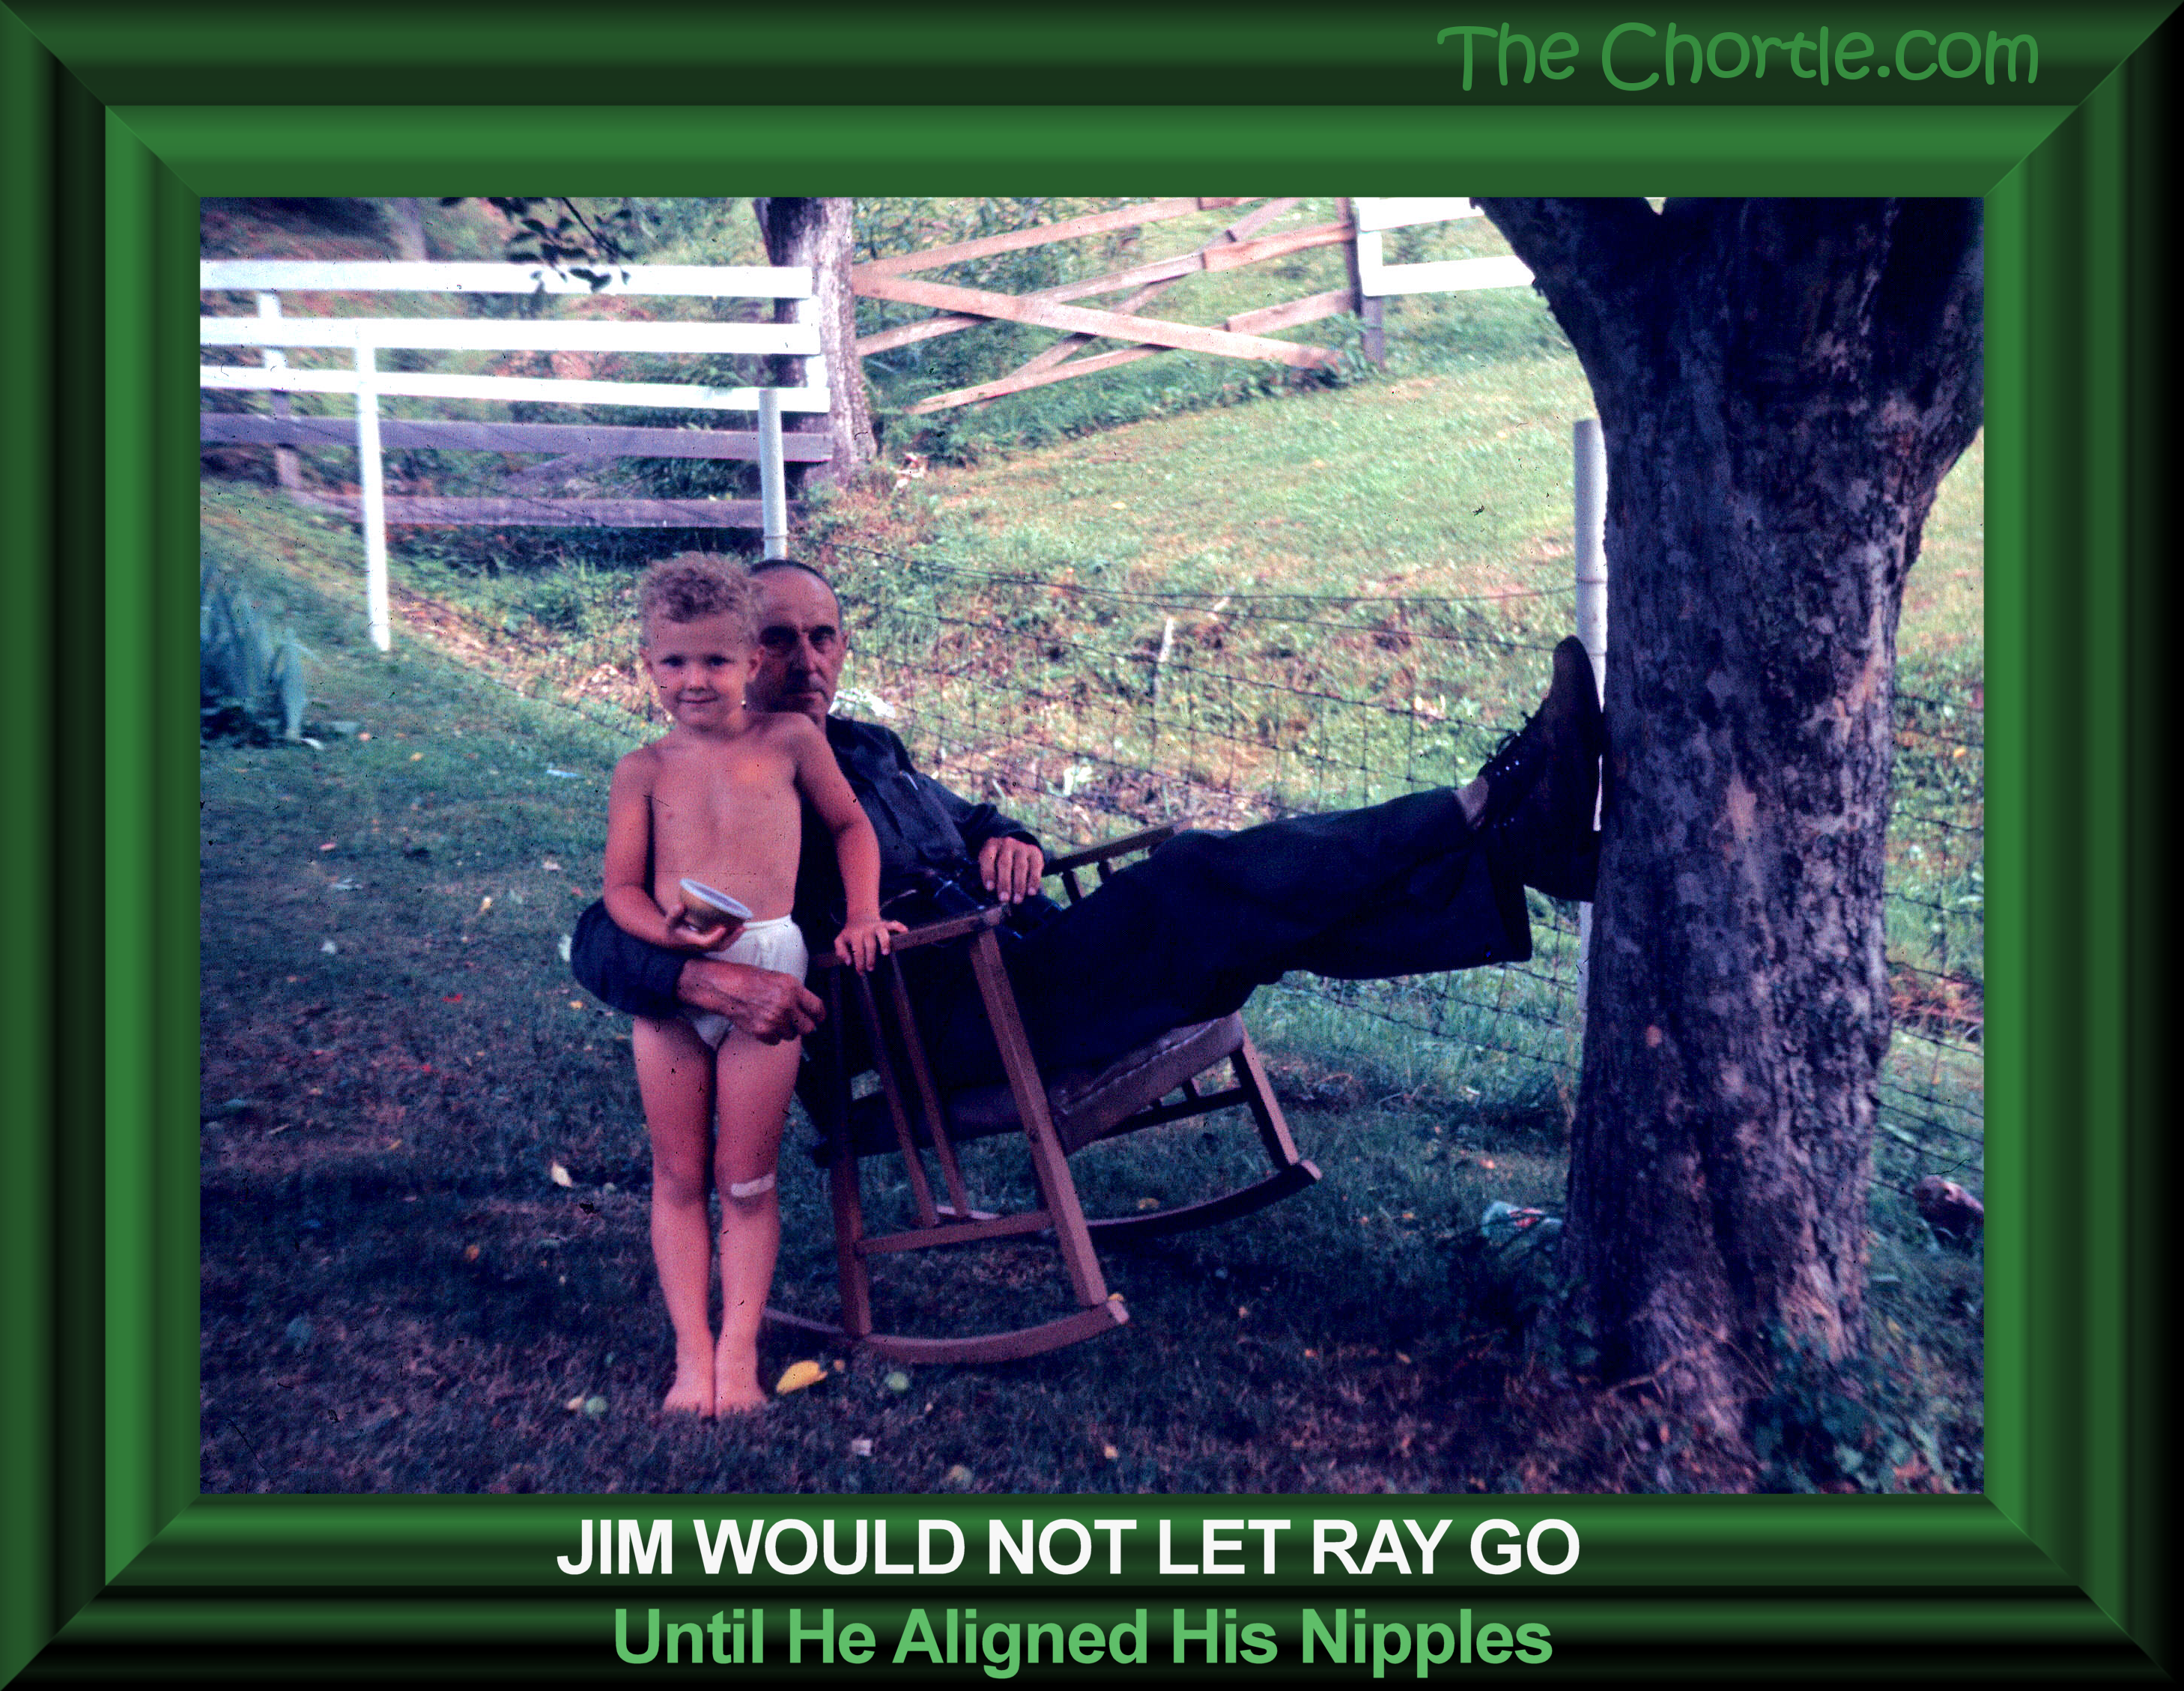 Jim would not let Ray go until he aligned his nipples.